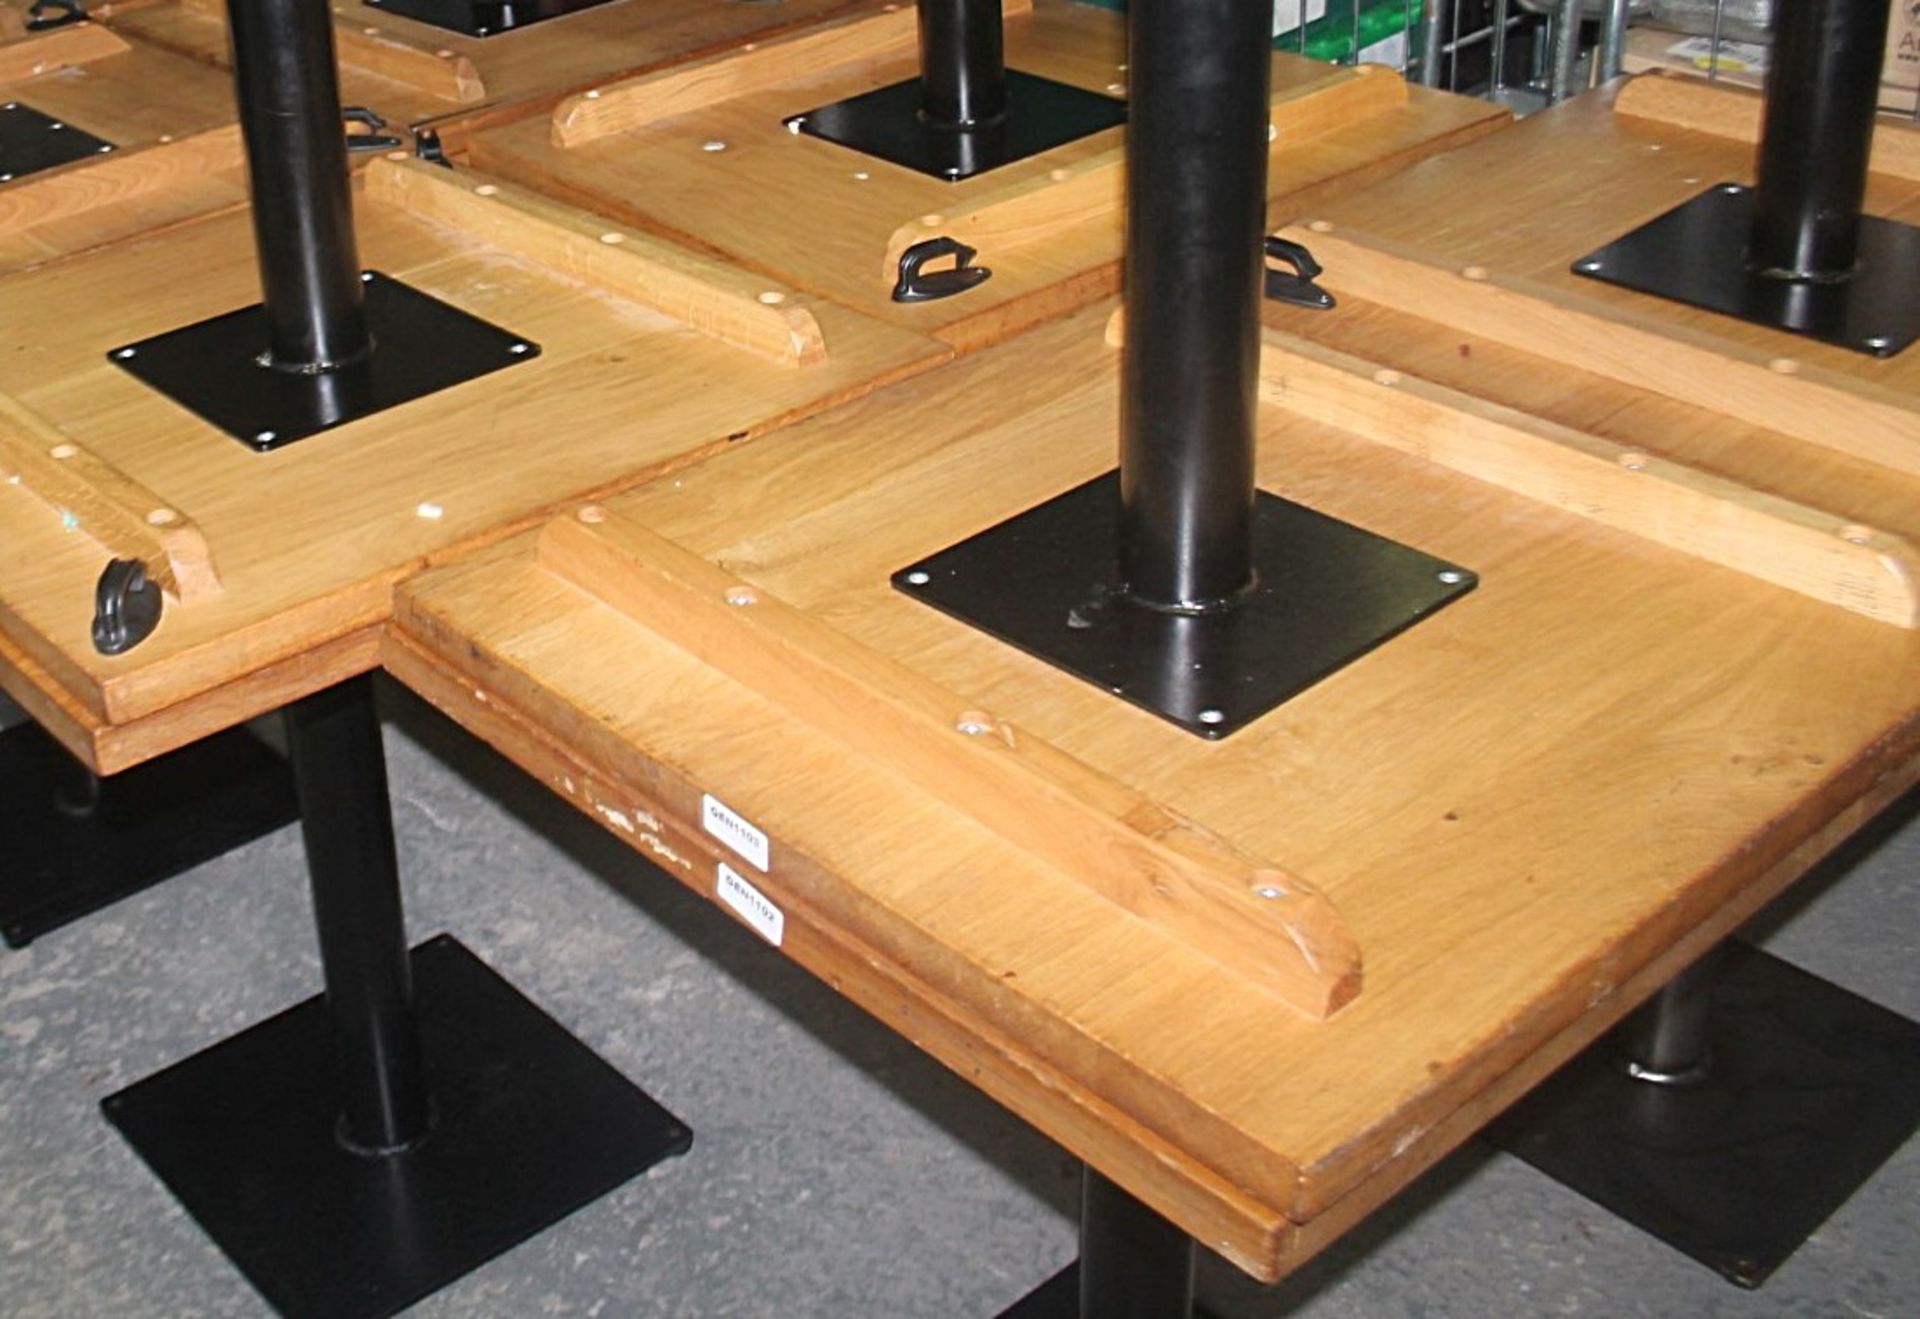 4 x Solid Oak Restaurant Dining Tables - Natural Rustic Knotty Oak Tops With Black Cast Iron Bases - Image 4 of 8